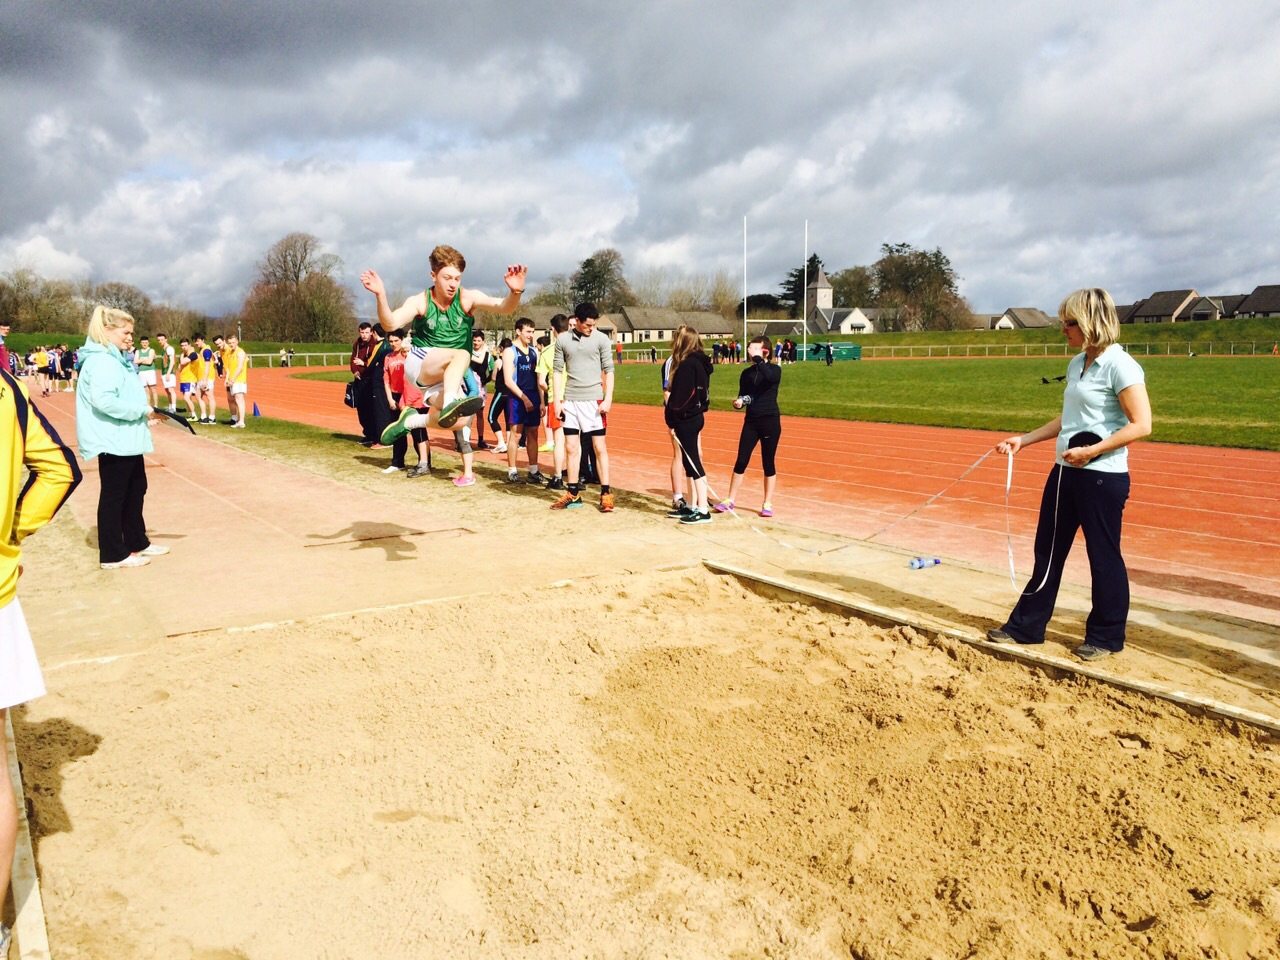 Sean Walton competing in the long jump at the LCETB Sports Day